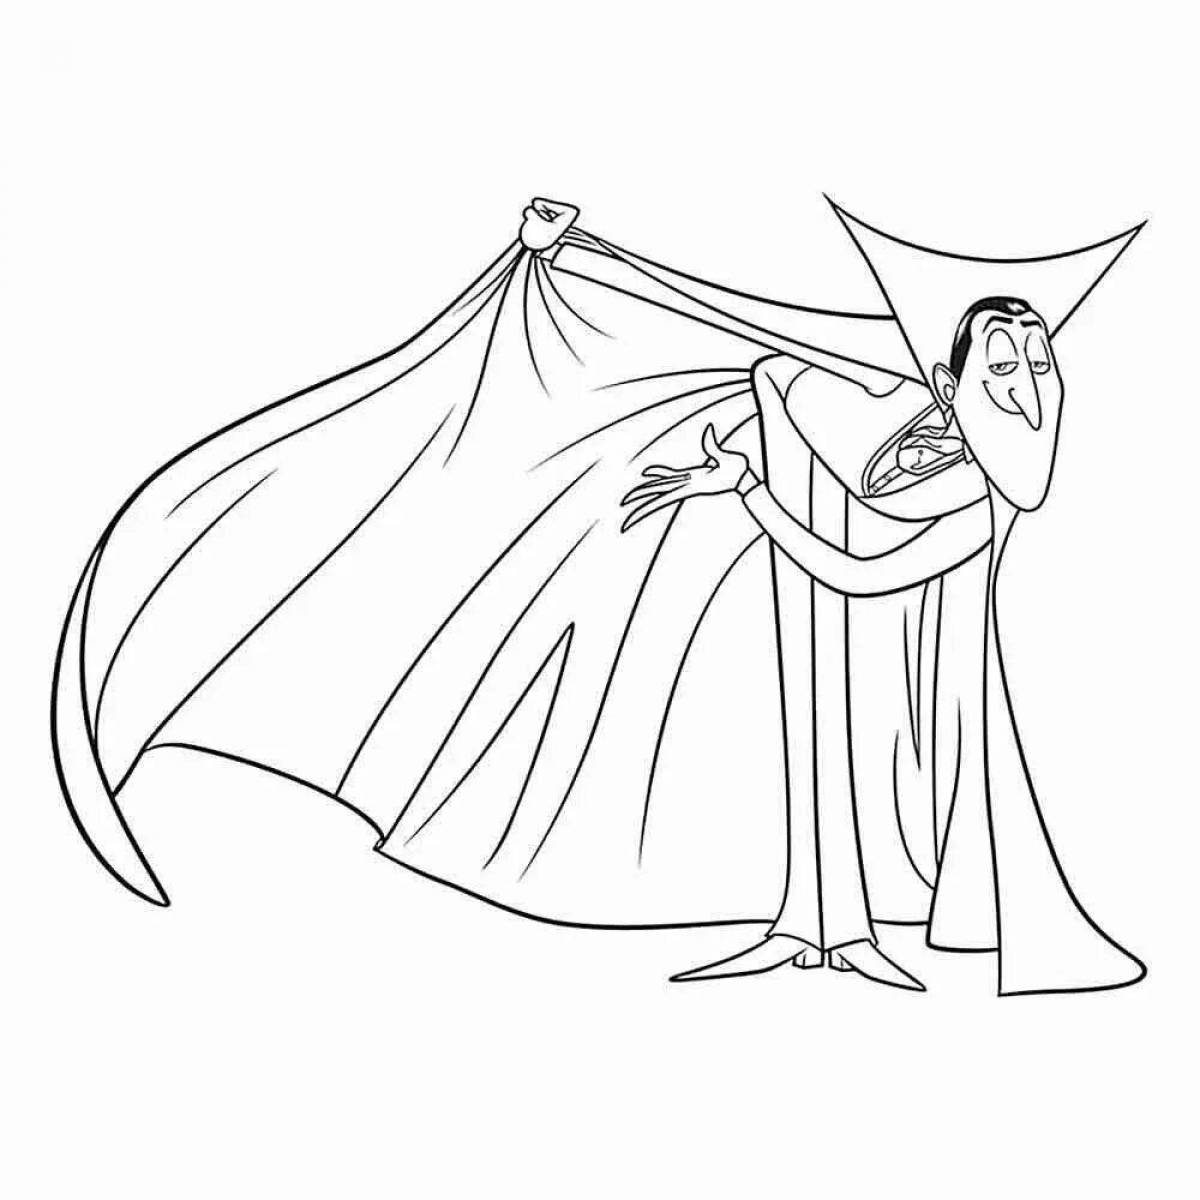 Coloring book Count Dracula Chilling